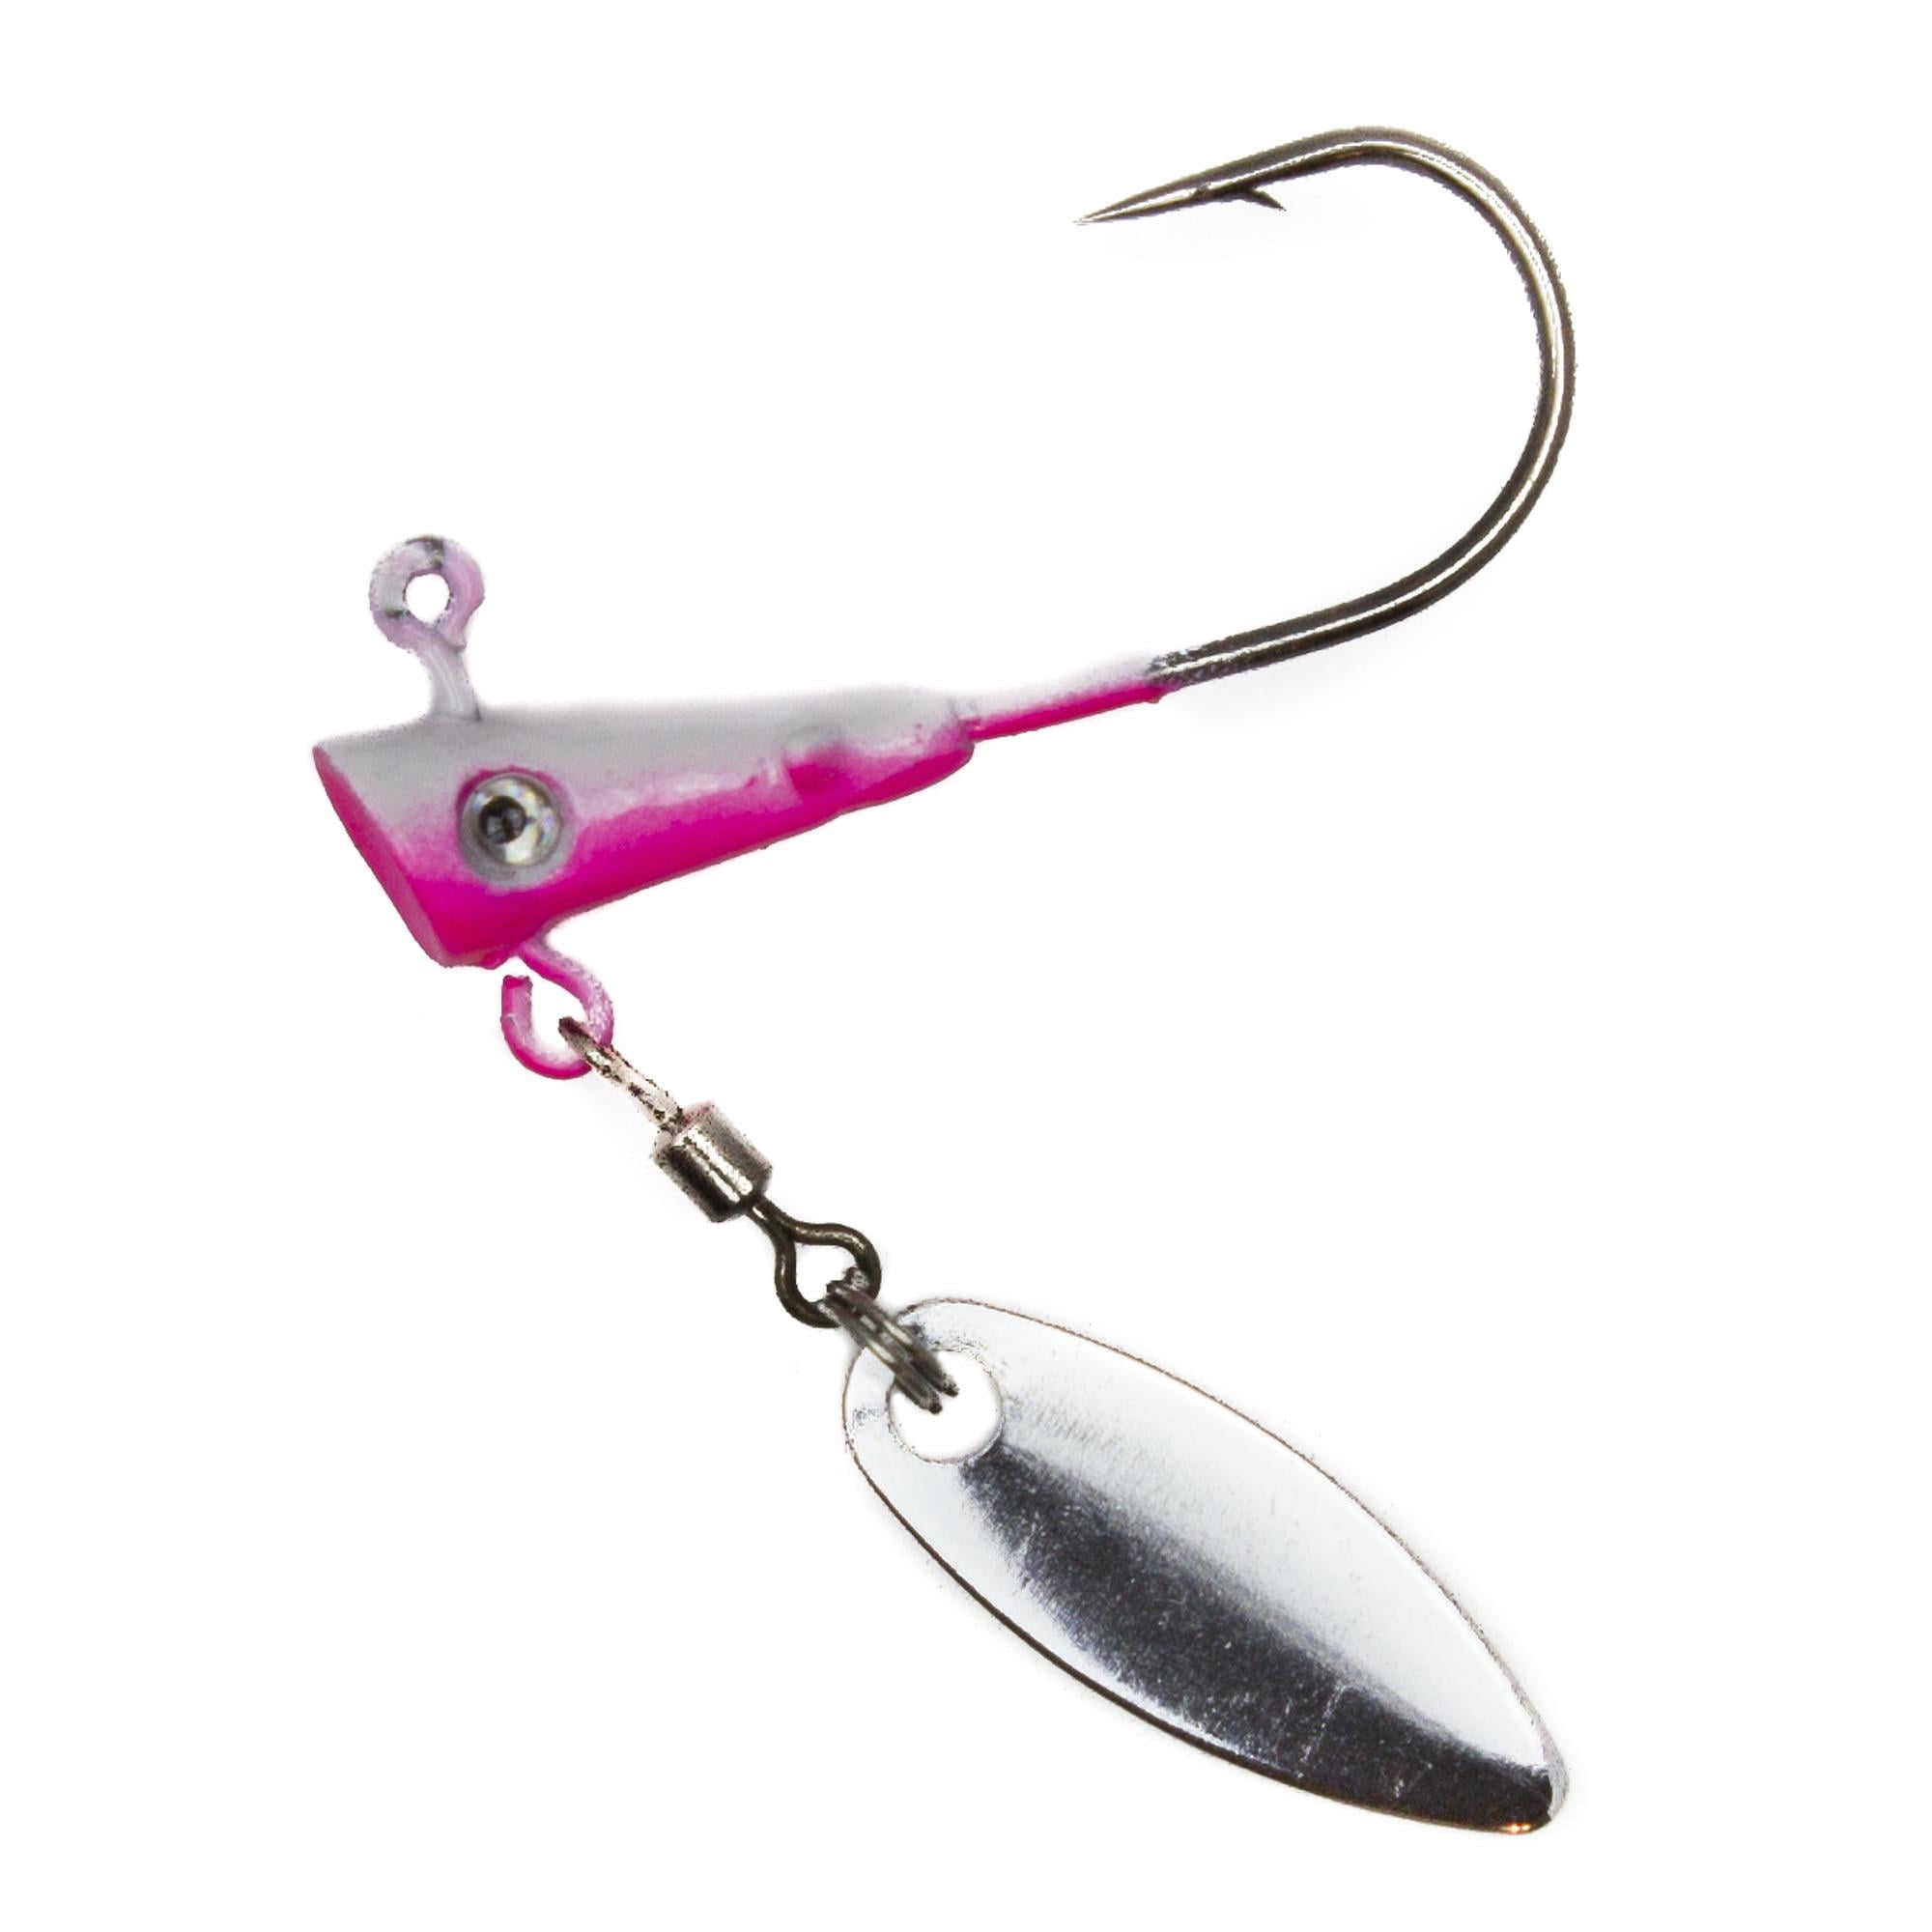 Fin Commander 17016 Fin Spin Jig Head 2pc Pack 1/16 oz. White And